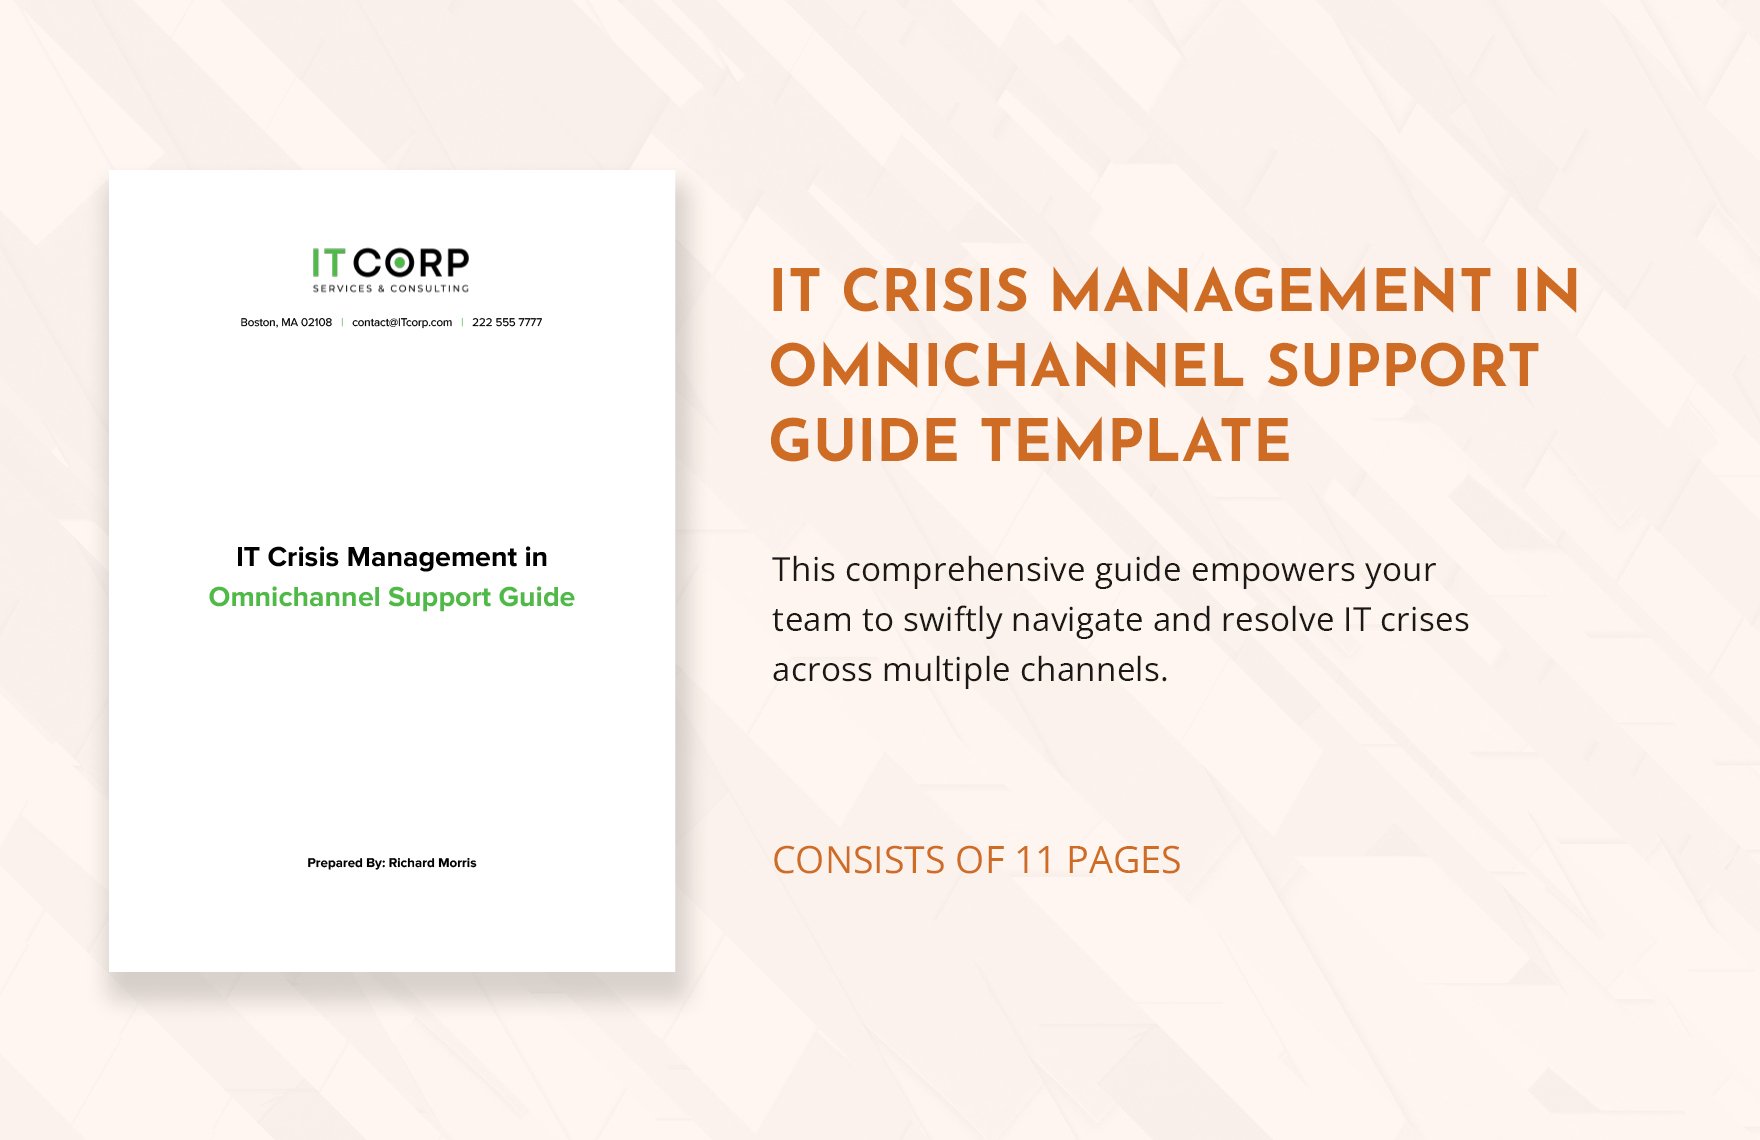 IT Crisis Management in Omnichannel Support Guide Template